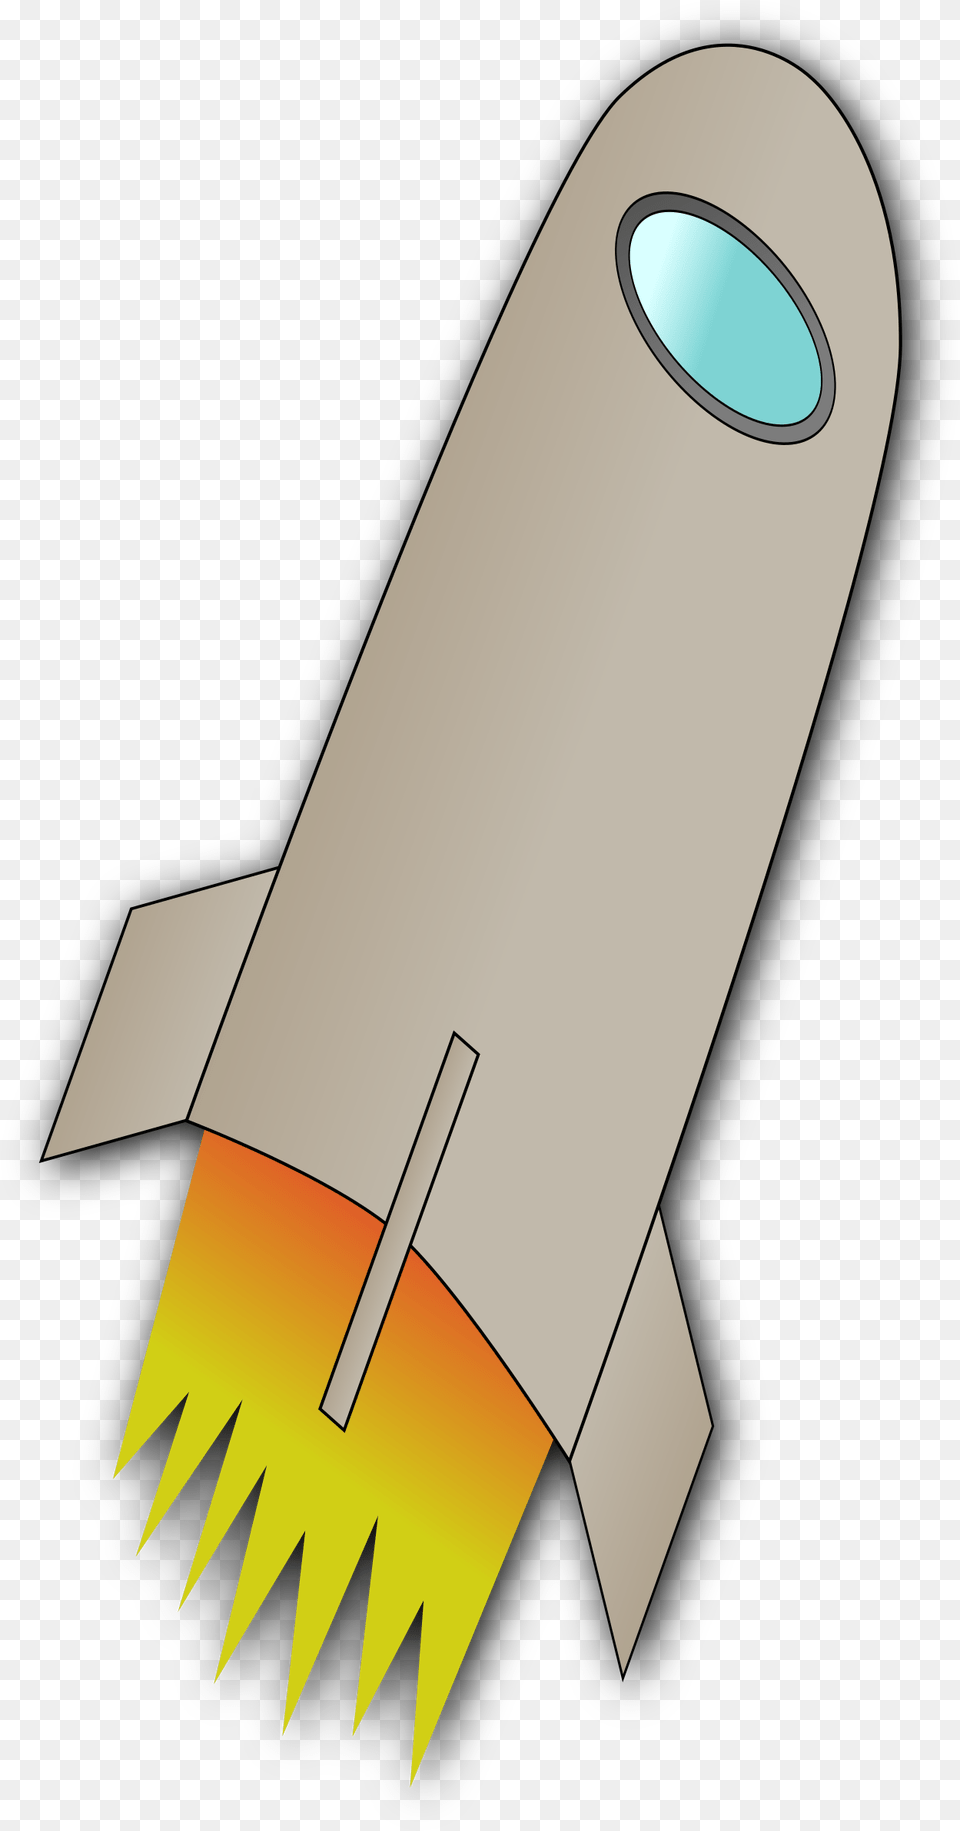 Space Rocket Whit Fire Clip Arts Rocket, Ammunition, Brush, Device, Missile Free Png Download